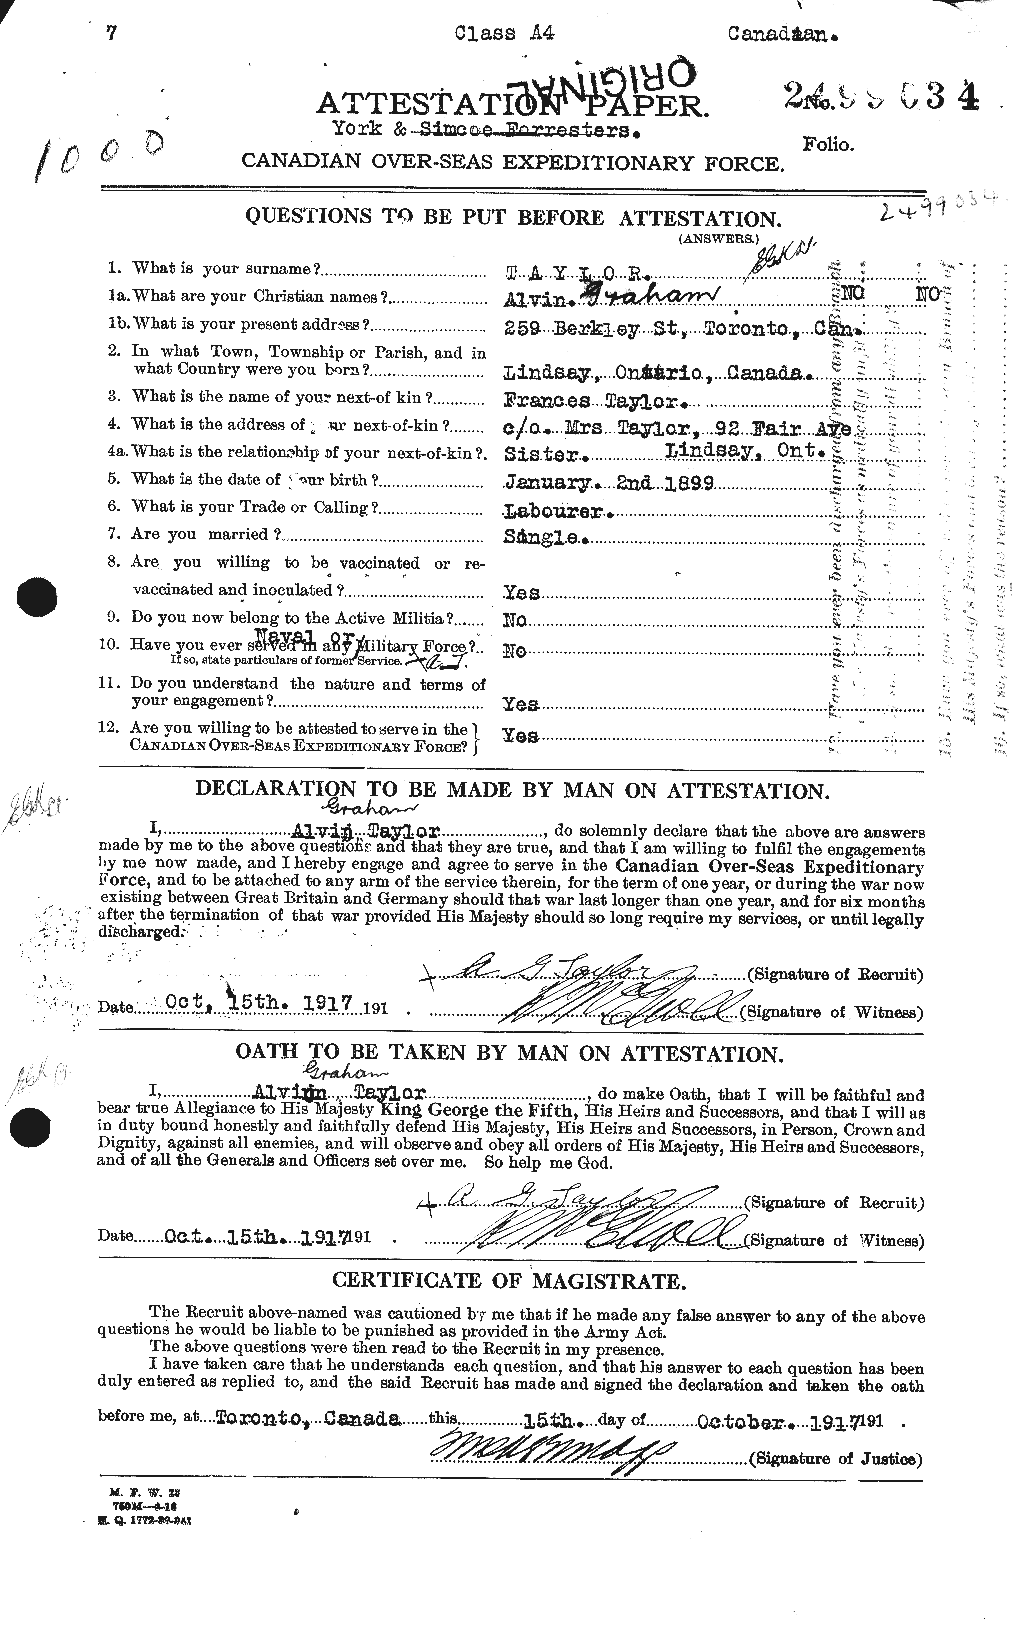 Personnel Records of the First World War - CEF 626213a